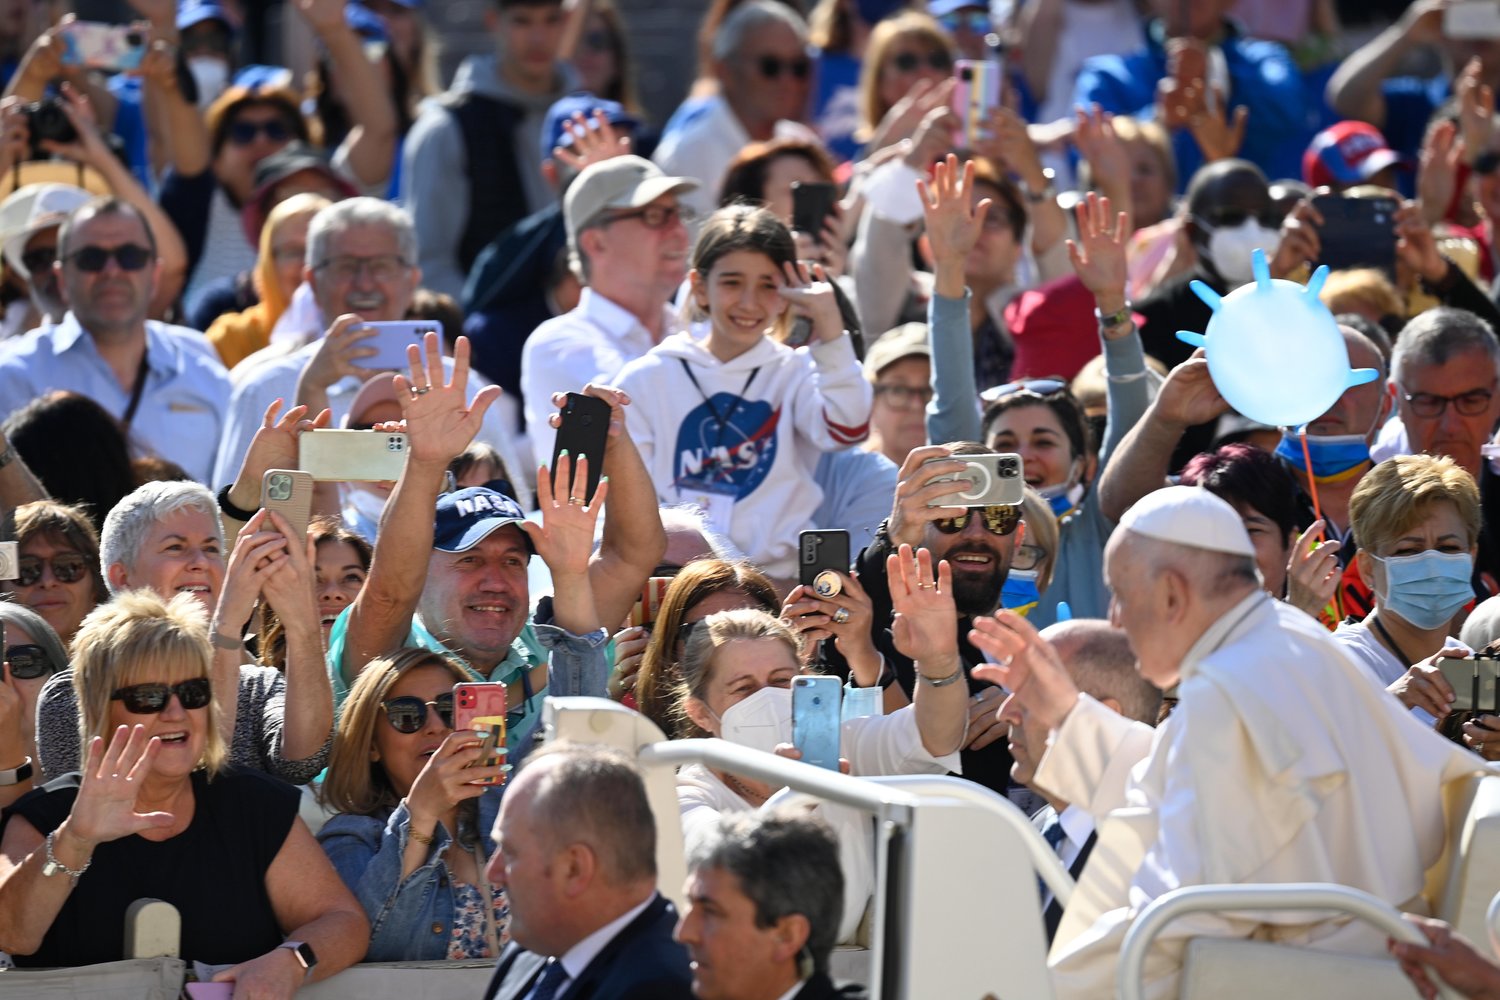 Pope Francis greets people as he arrives for his general audience in St. Peter’s Square at the Vatican May 11.